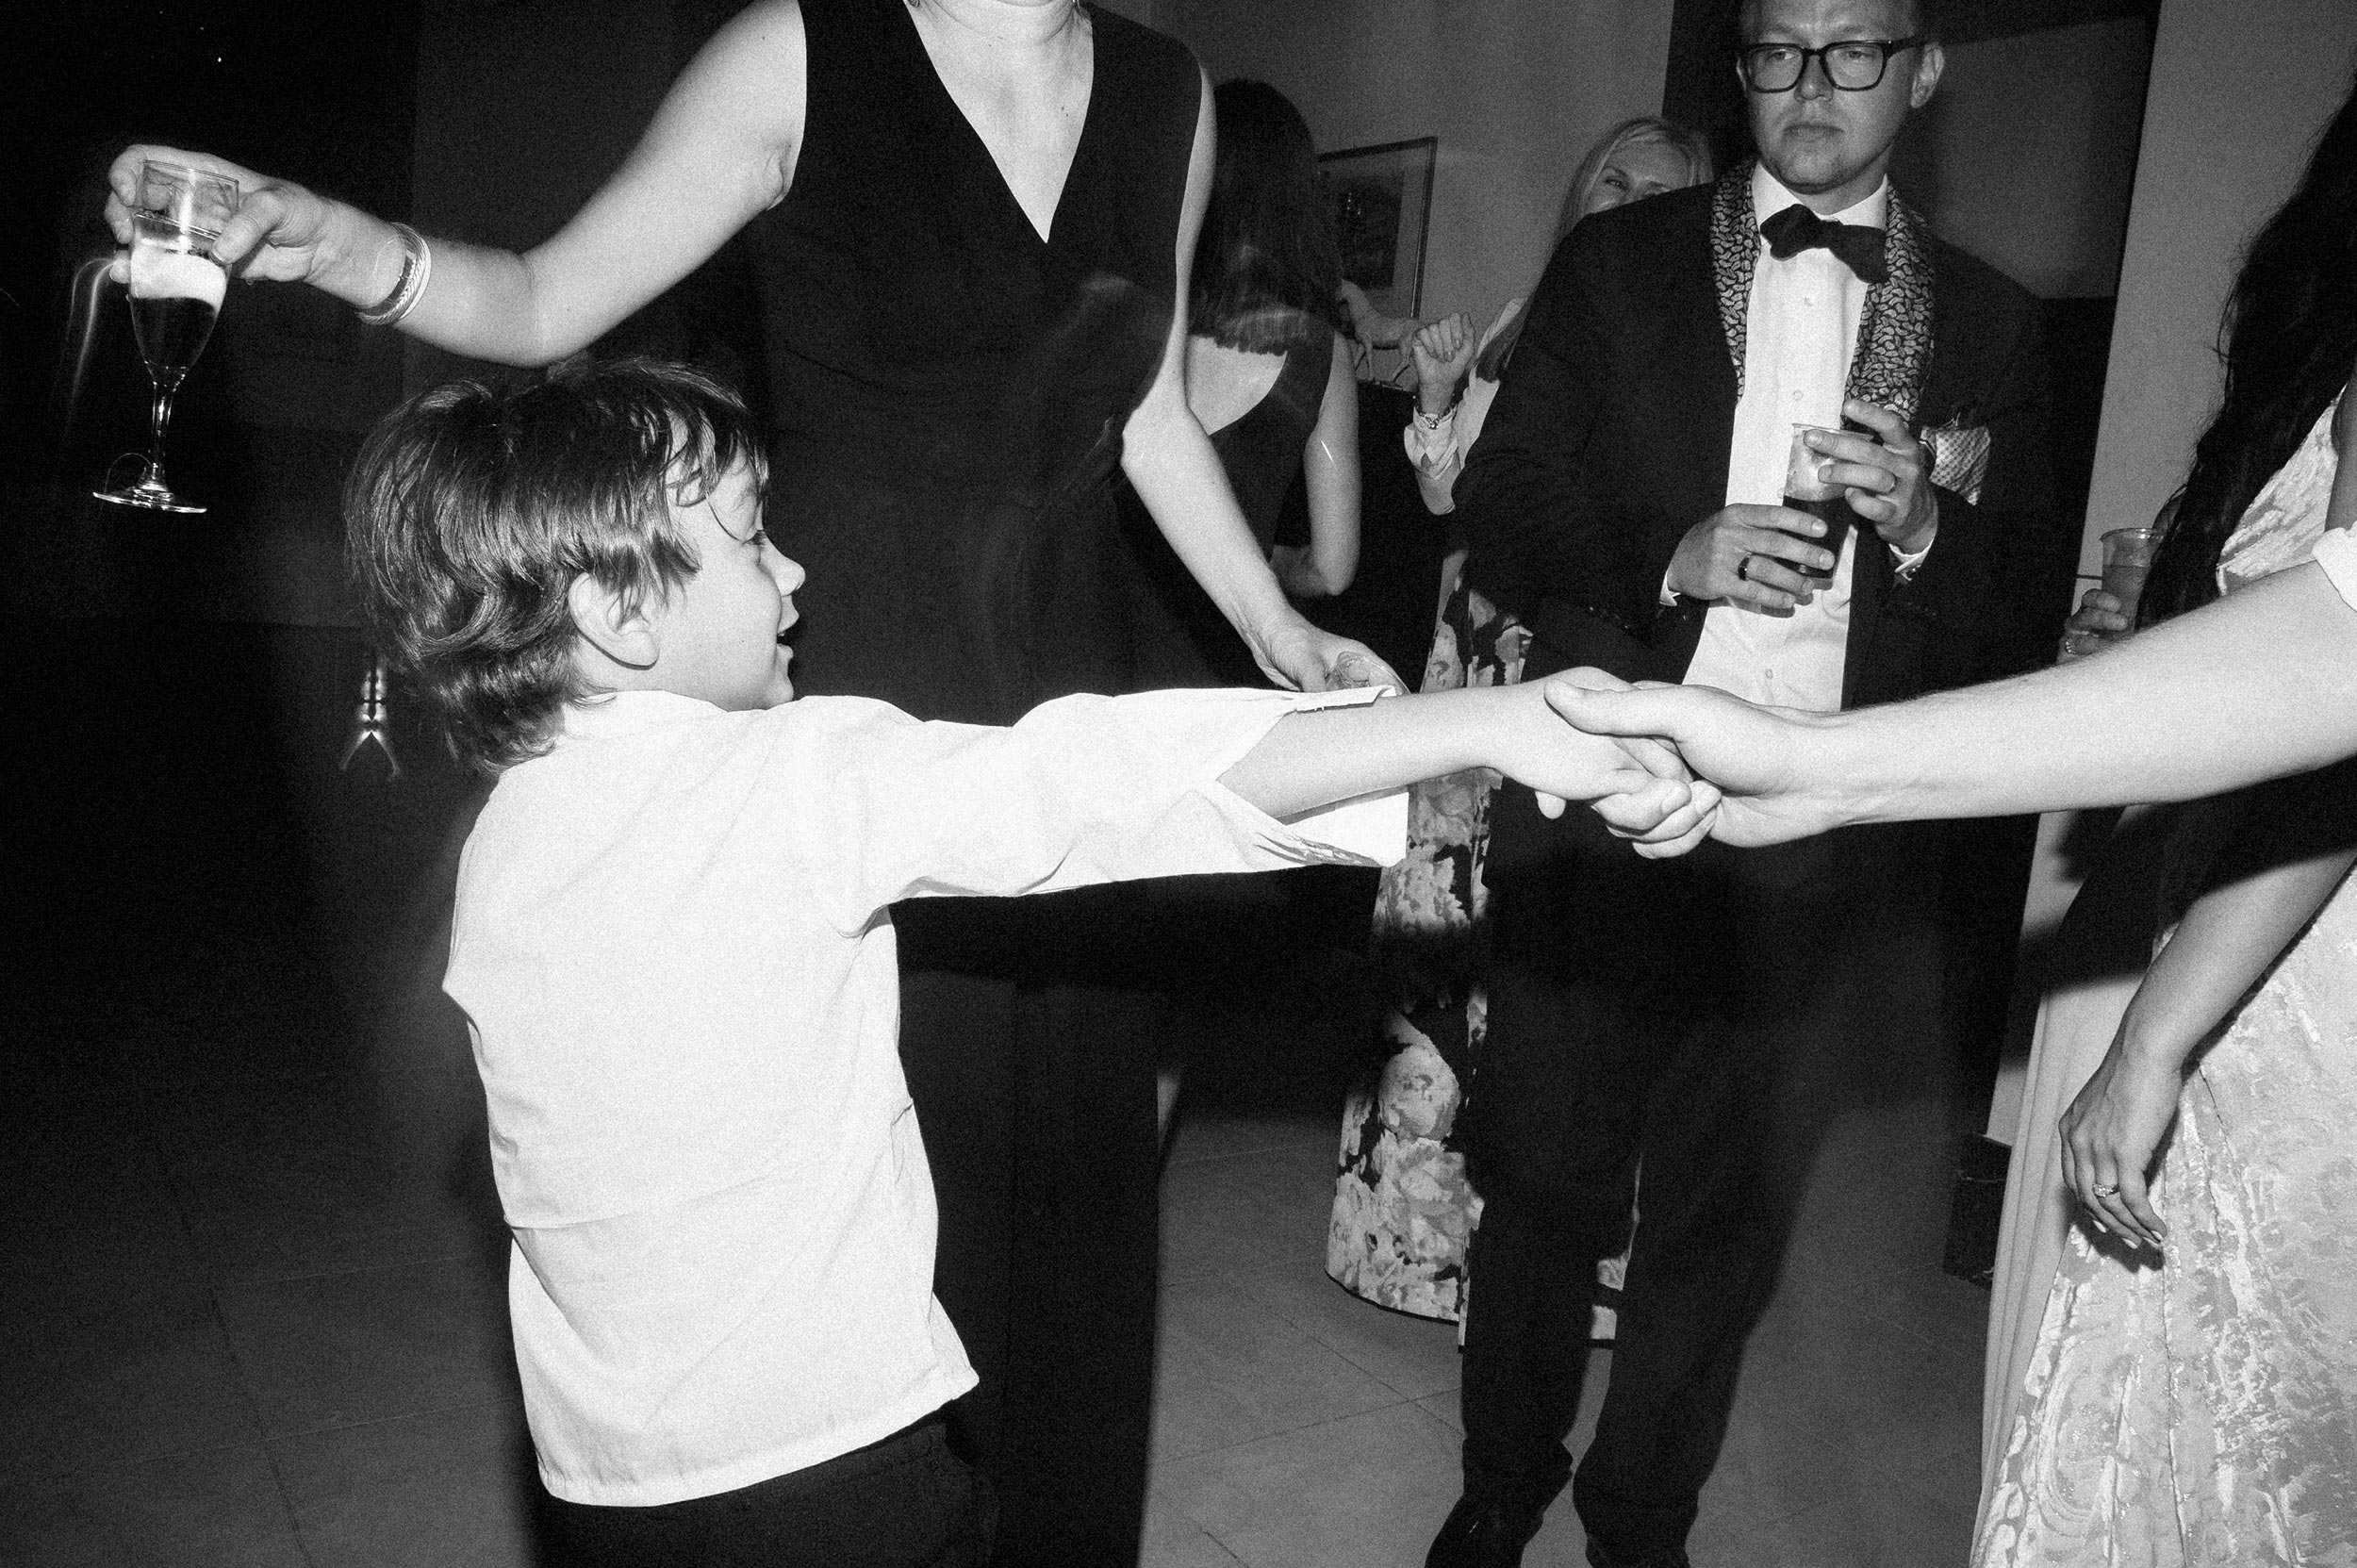 kid-dancing-during-reception-black-and-white-60s-style-black-and-white-wedding-photography.jpg